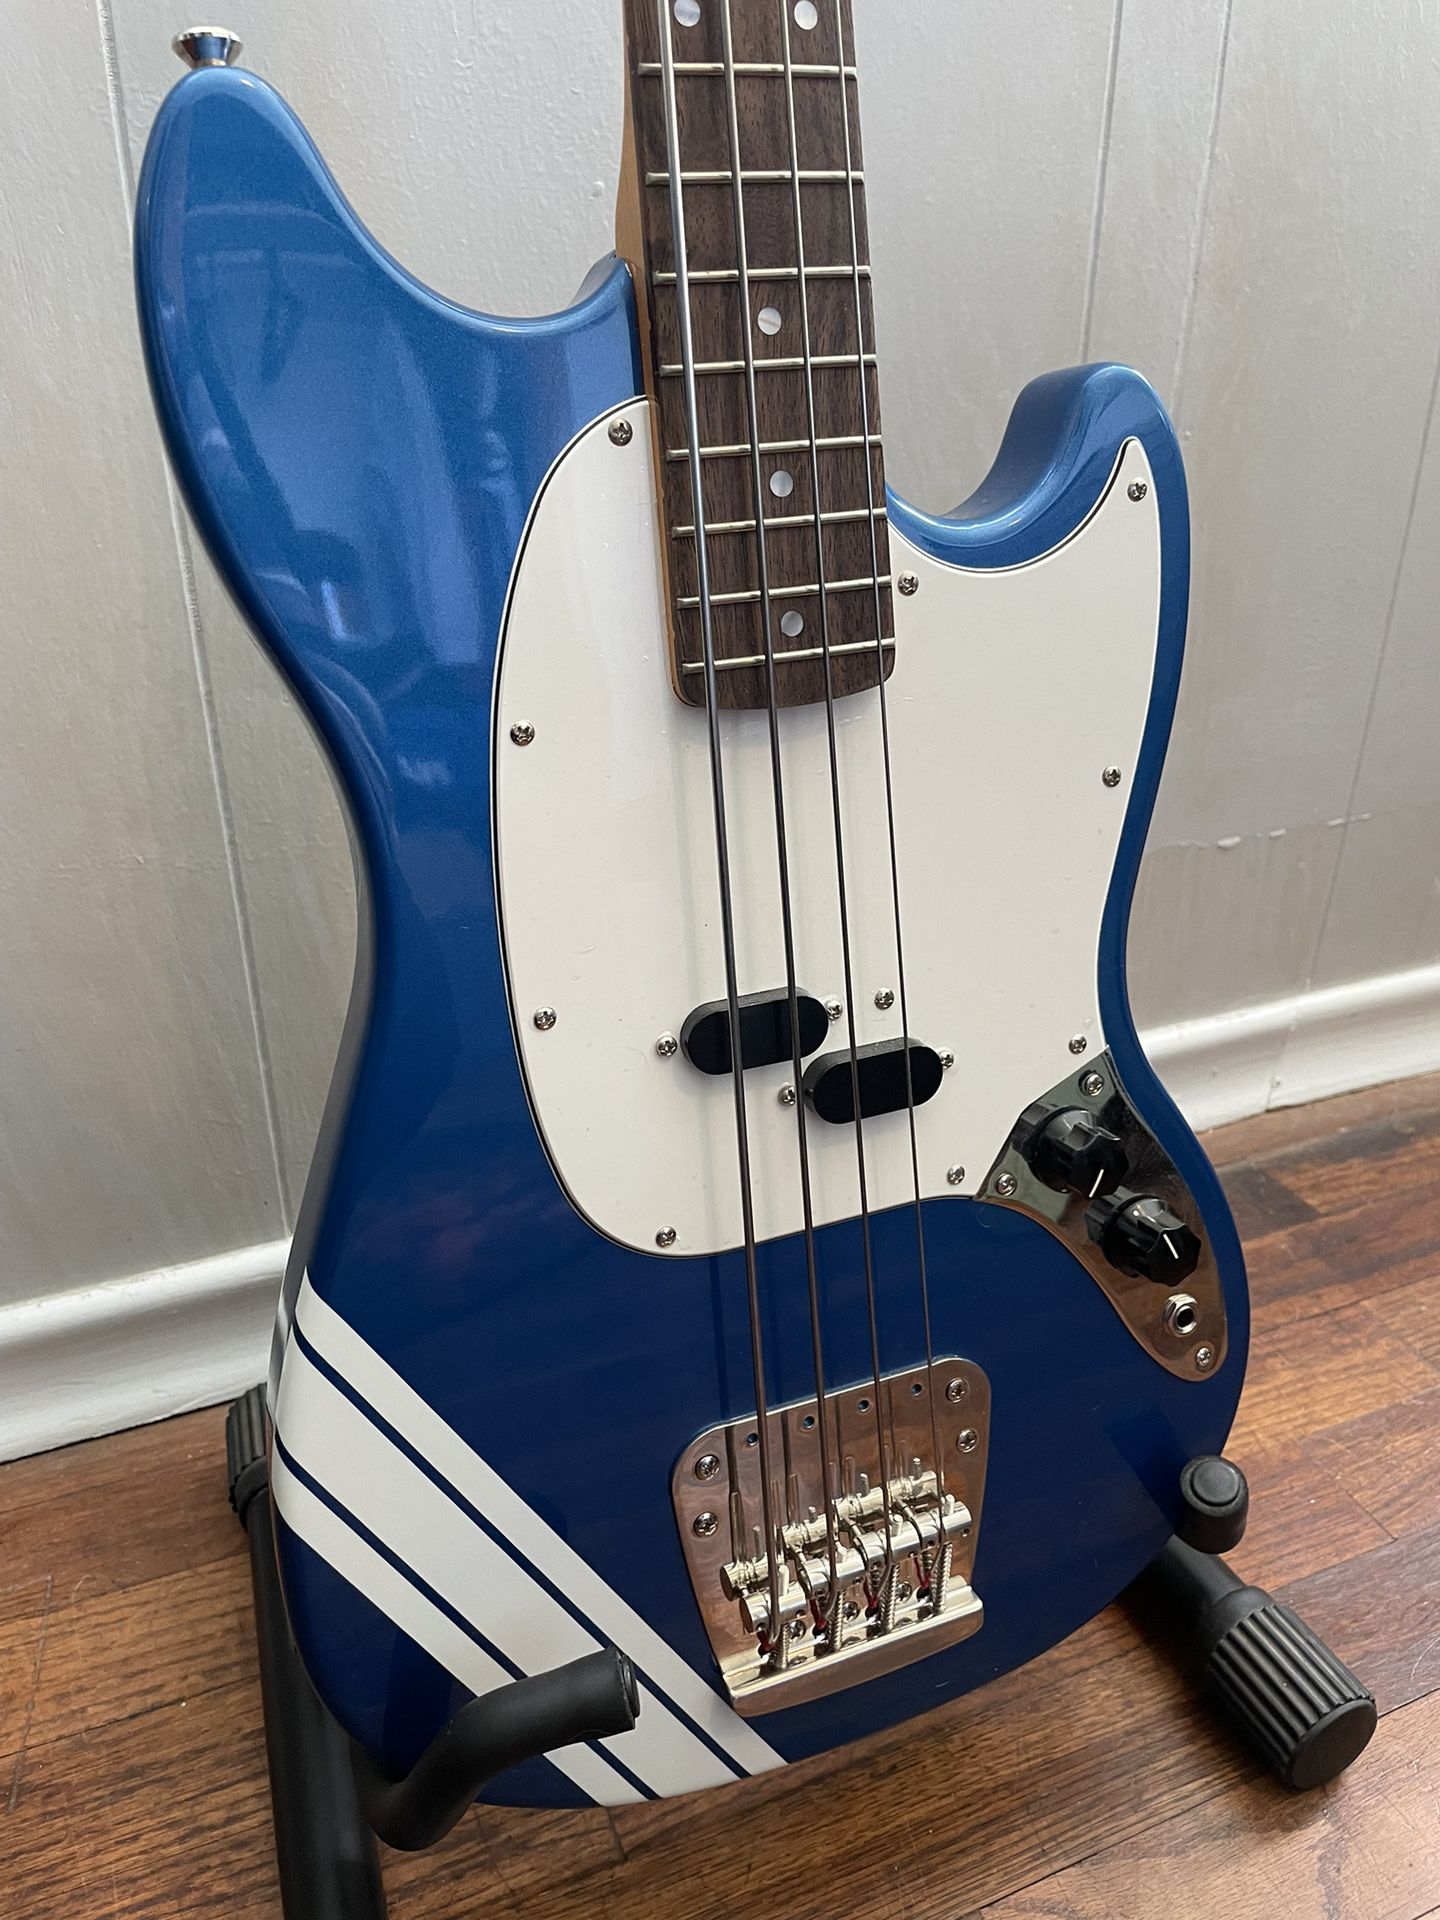 Squier Classic Vibe '60s Competition Mustang Bass